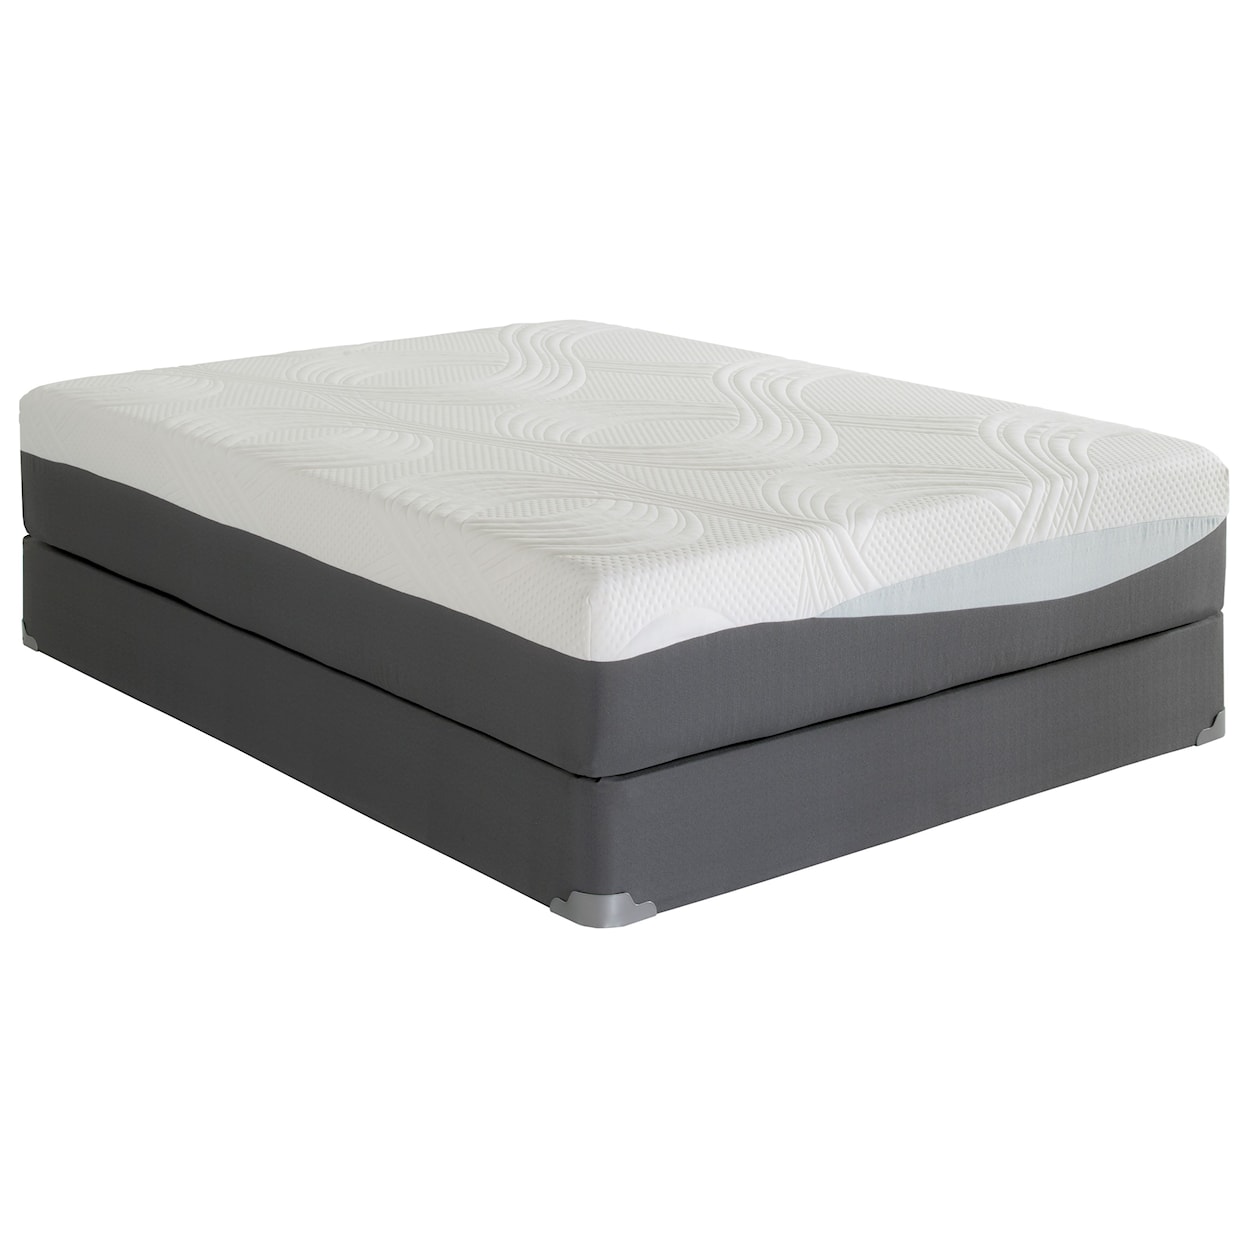 Spring Air Cool Reflections Phase 3 Queen Luxury Plush Memory Foam Mattress Set